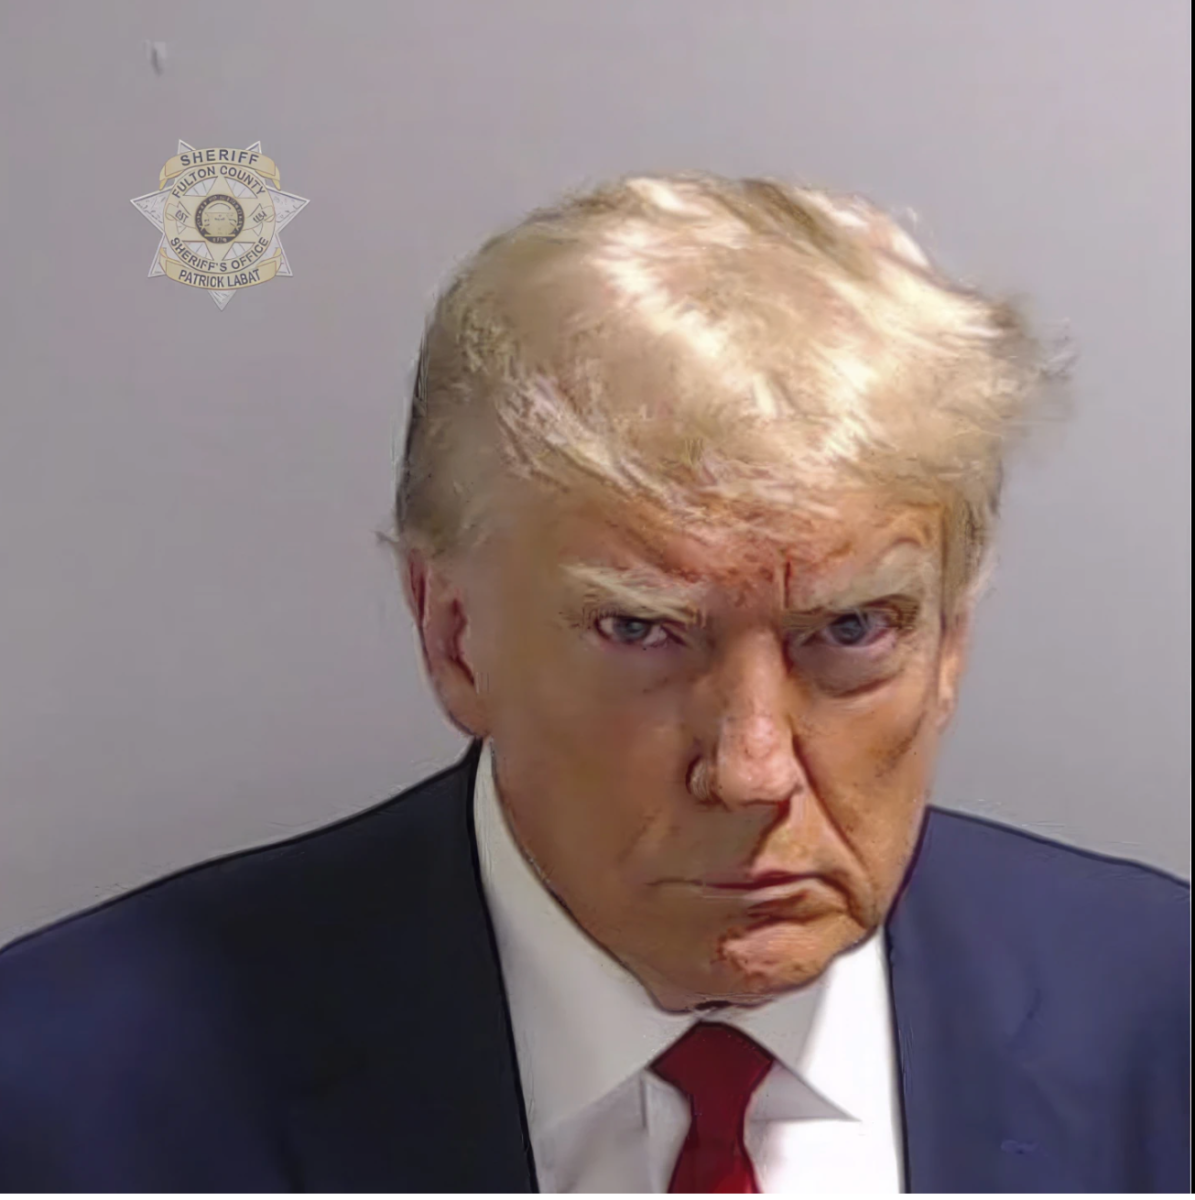 TRUMP+CHARGES.+Trump+has+been+charged+with+34+felony+counts+in+NY%2C+40+felony+counts+in+FL%2C+4+felony+counts+in+D.C.%2C+and+13+felony+counts+in+GA